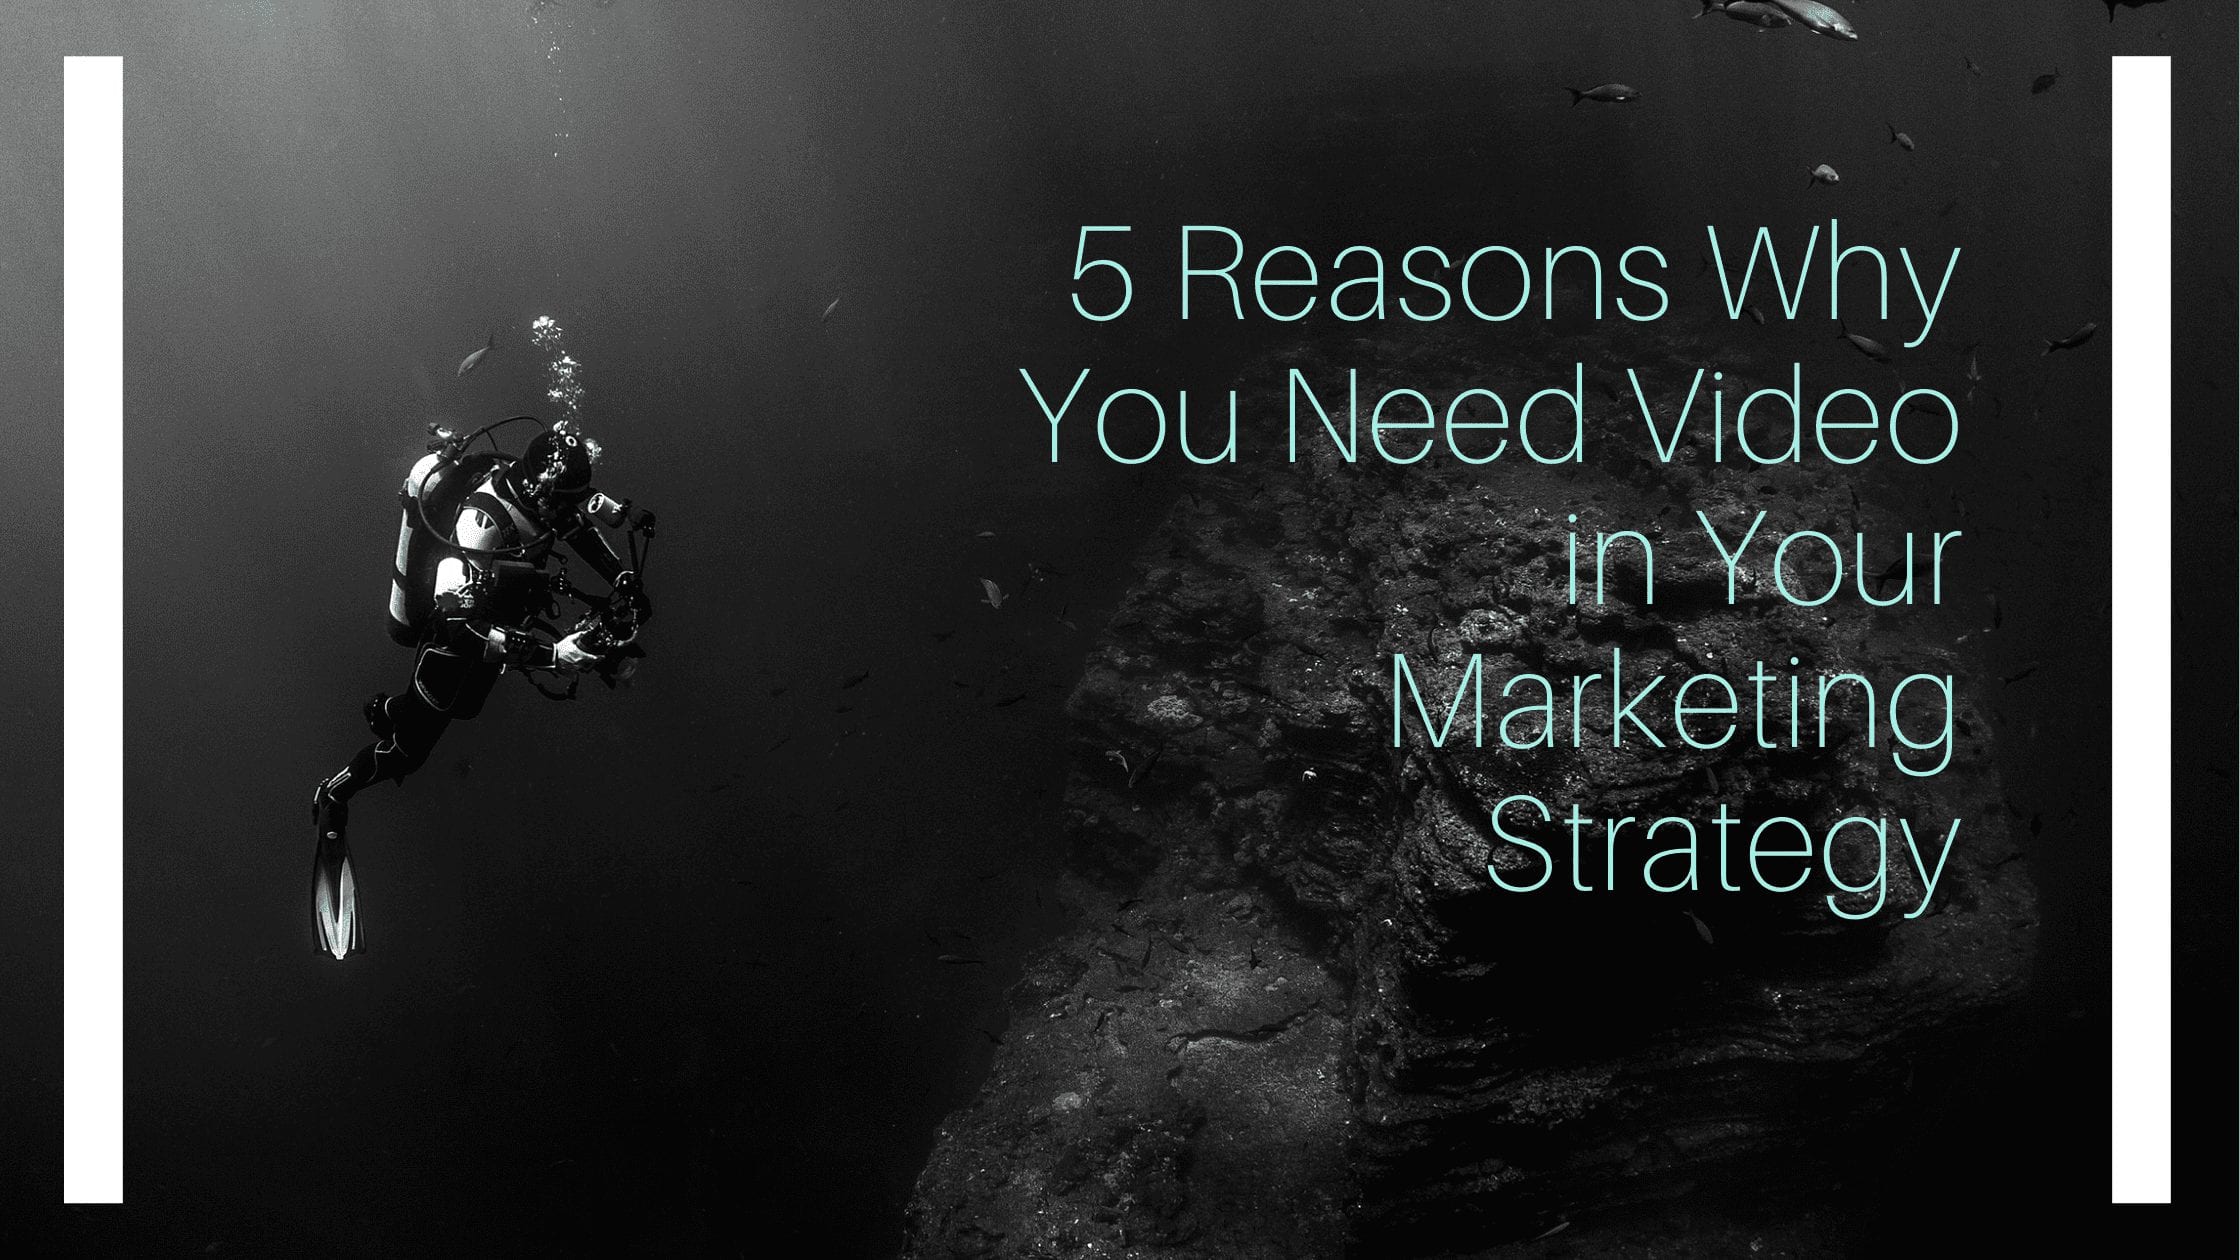 5 Reasons Why You Need Video in Your Marketing Strategy